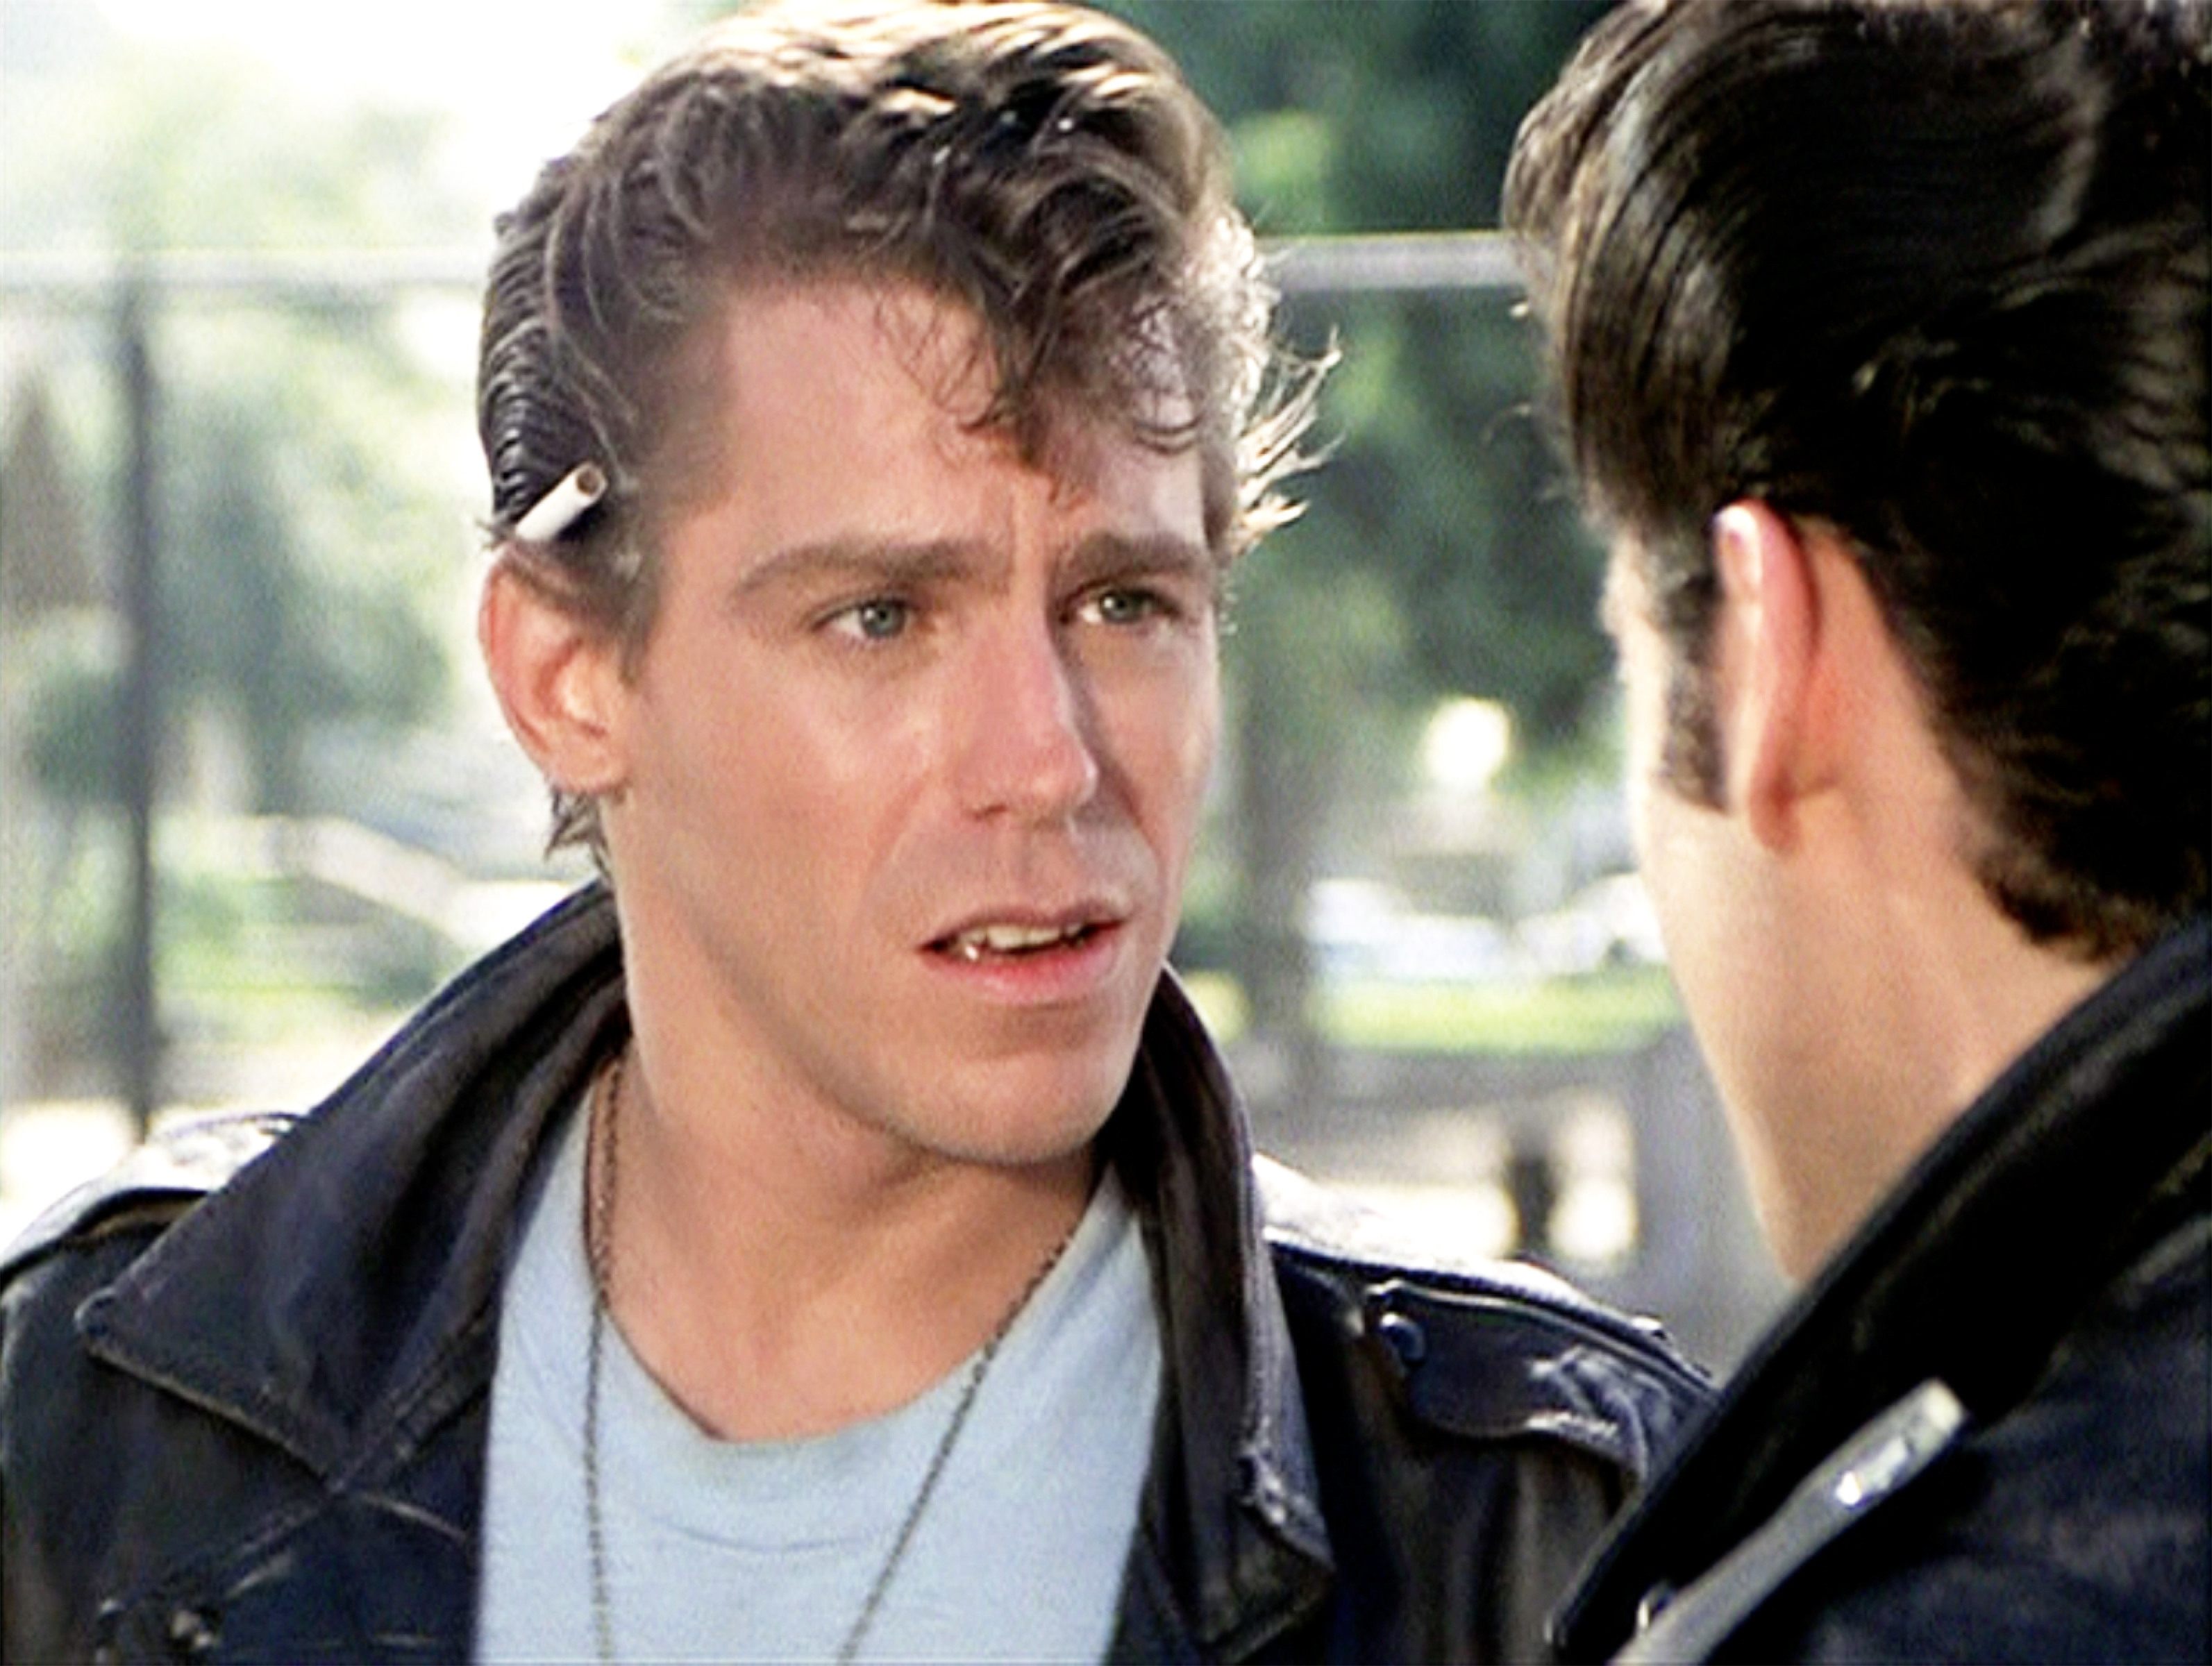 Jeff Conaway as Kenickie on the set of 'Grease'